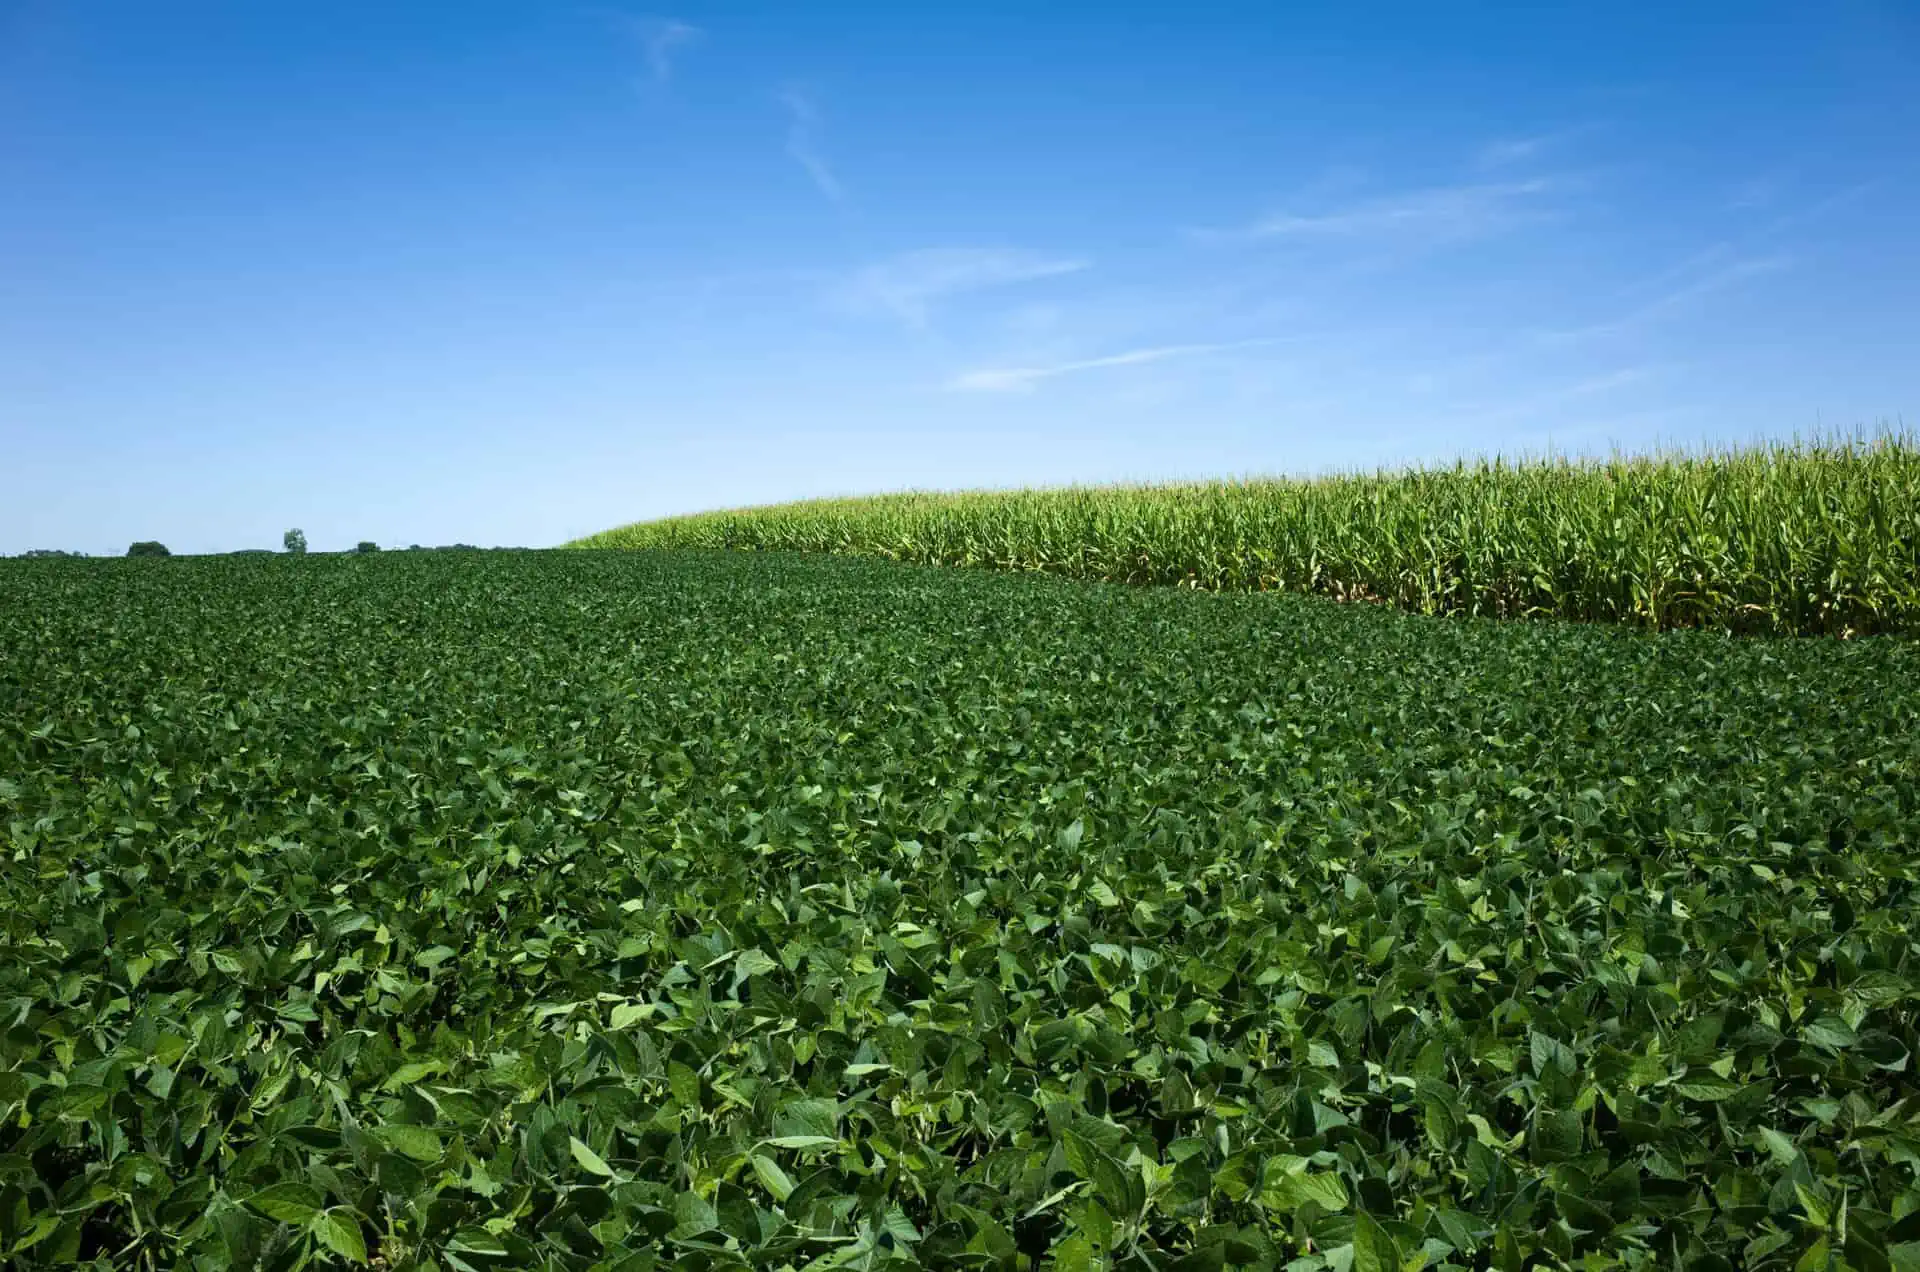 Field of soybeans and corn. Soybeans rank second, after corn, among the most-planted field crops in the U.S. Soybeans are used to create a variety of products, the most basic of which are soybean oil,